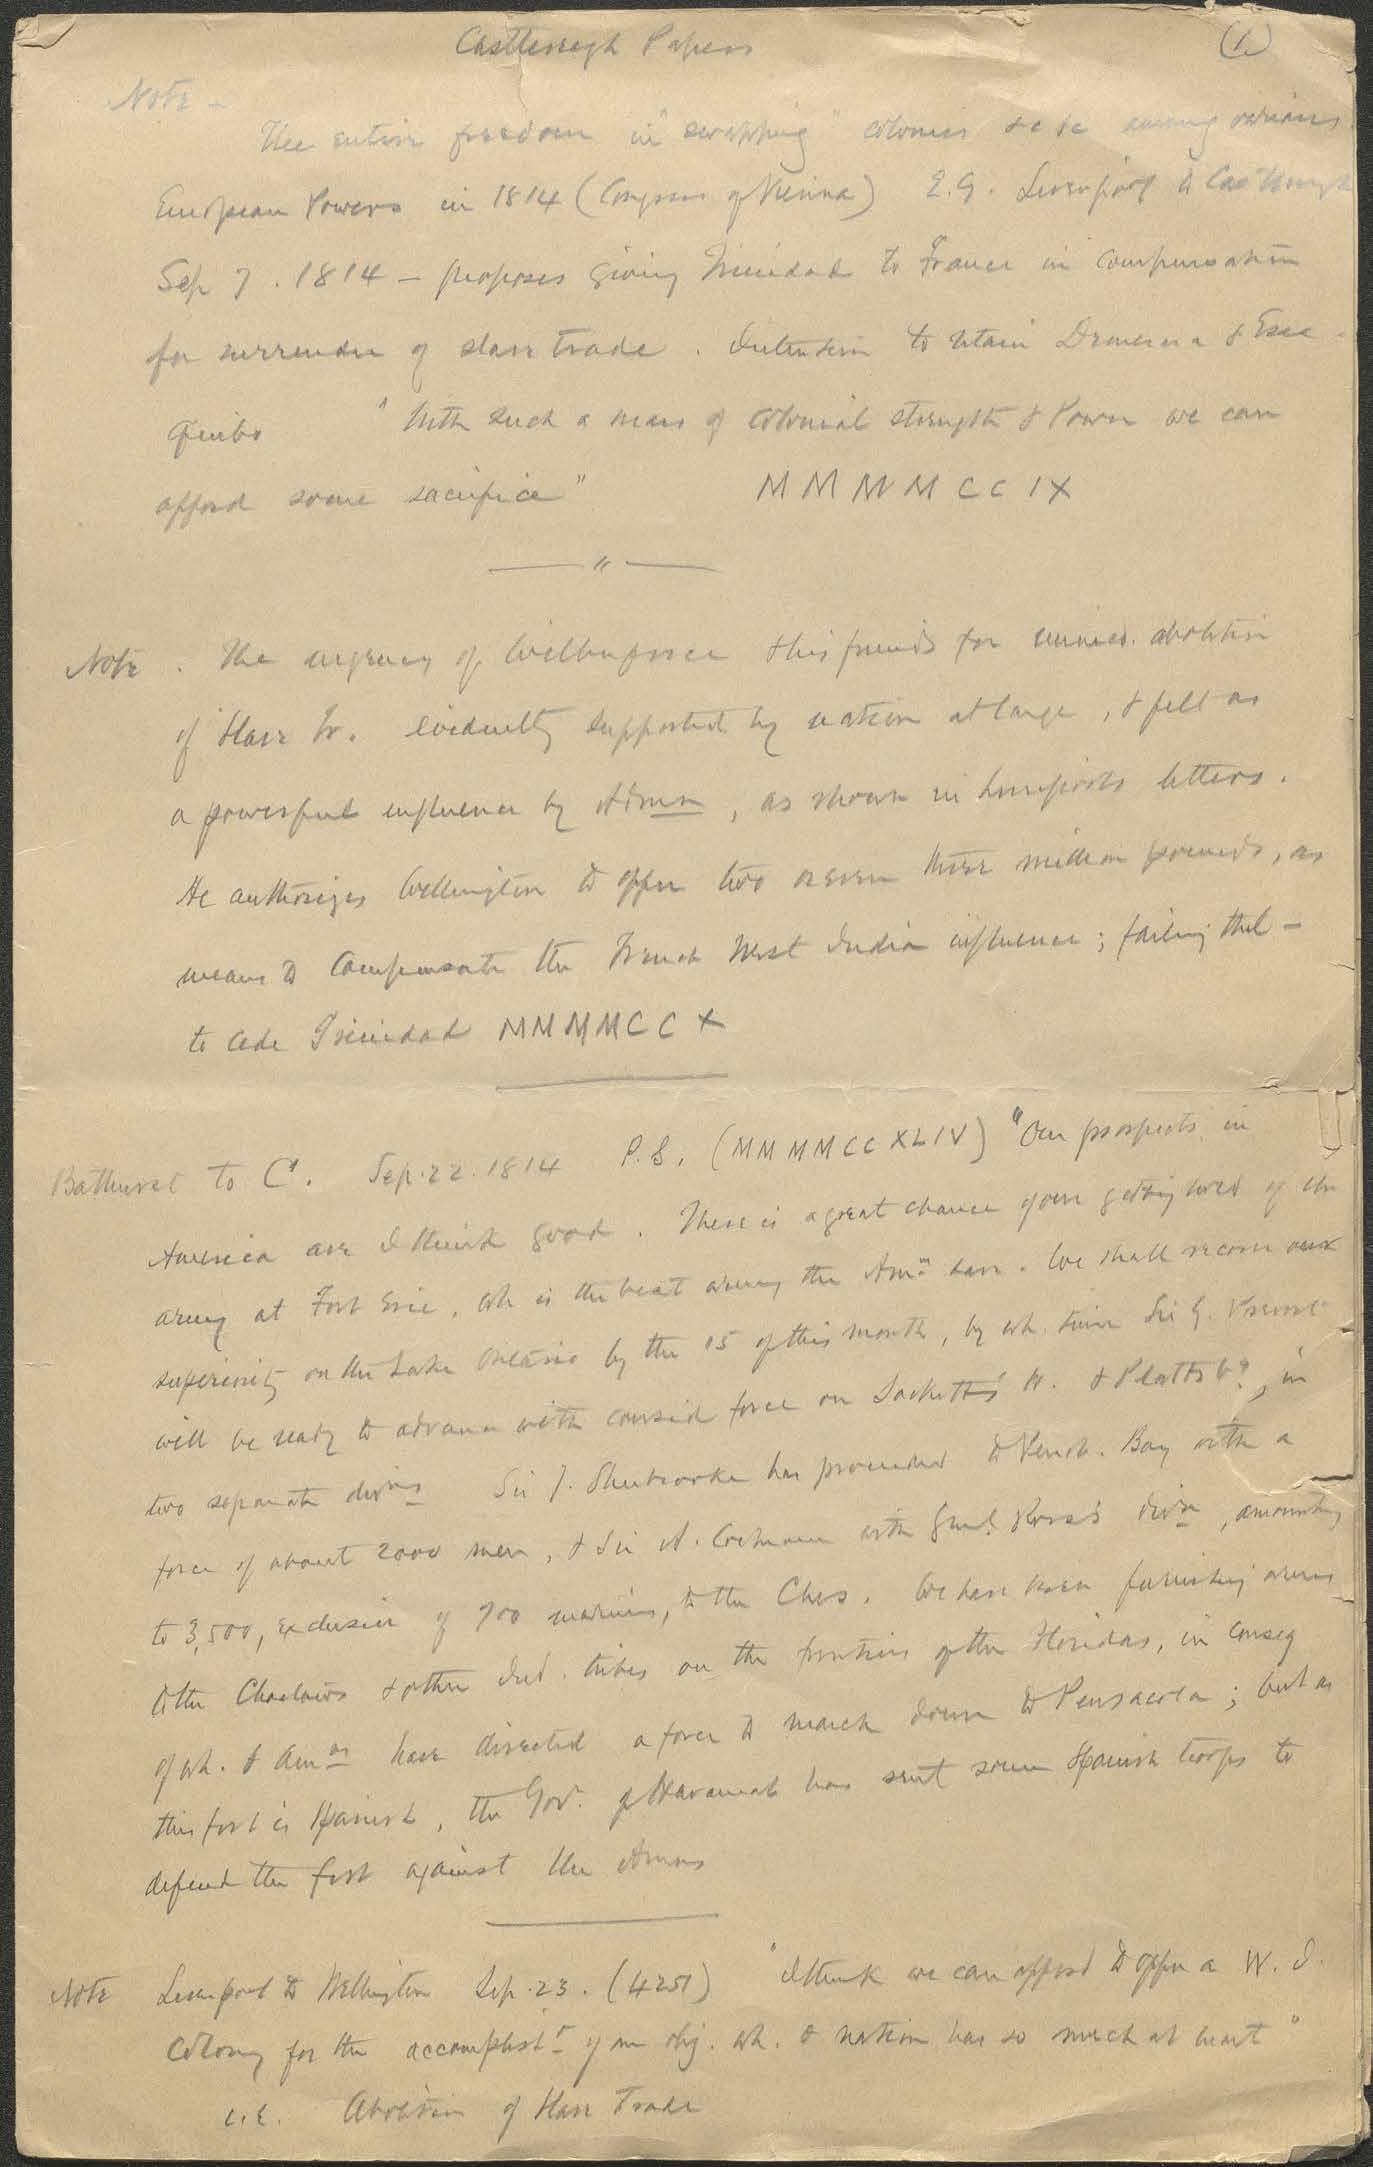 Mahan&#39;s research notes: Mahan&#39;s notations from copying Castlereagh papers from the British Museum